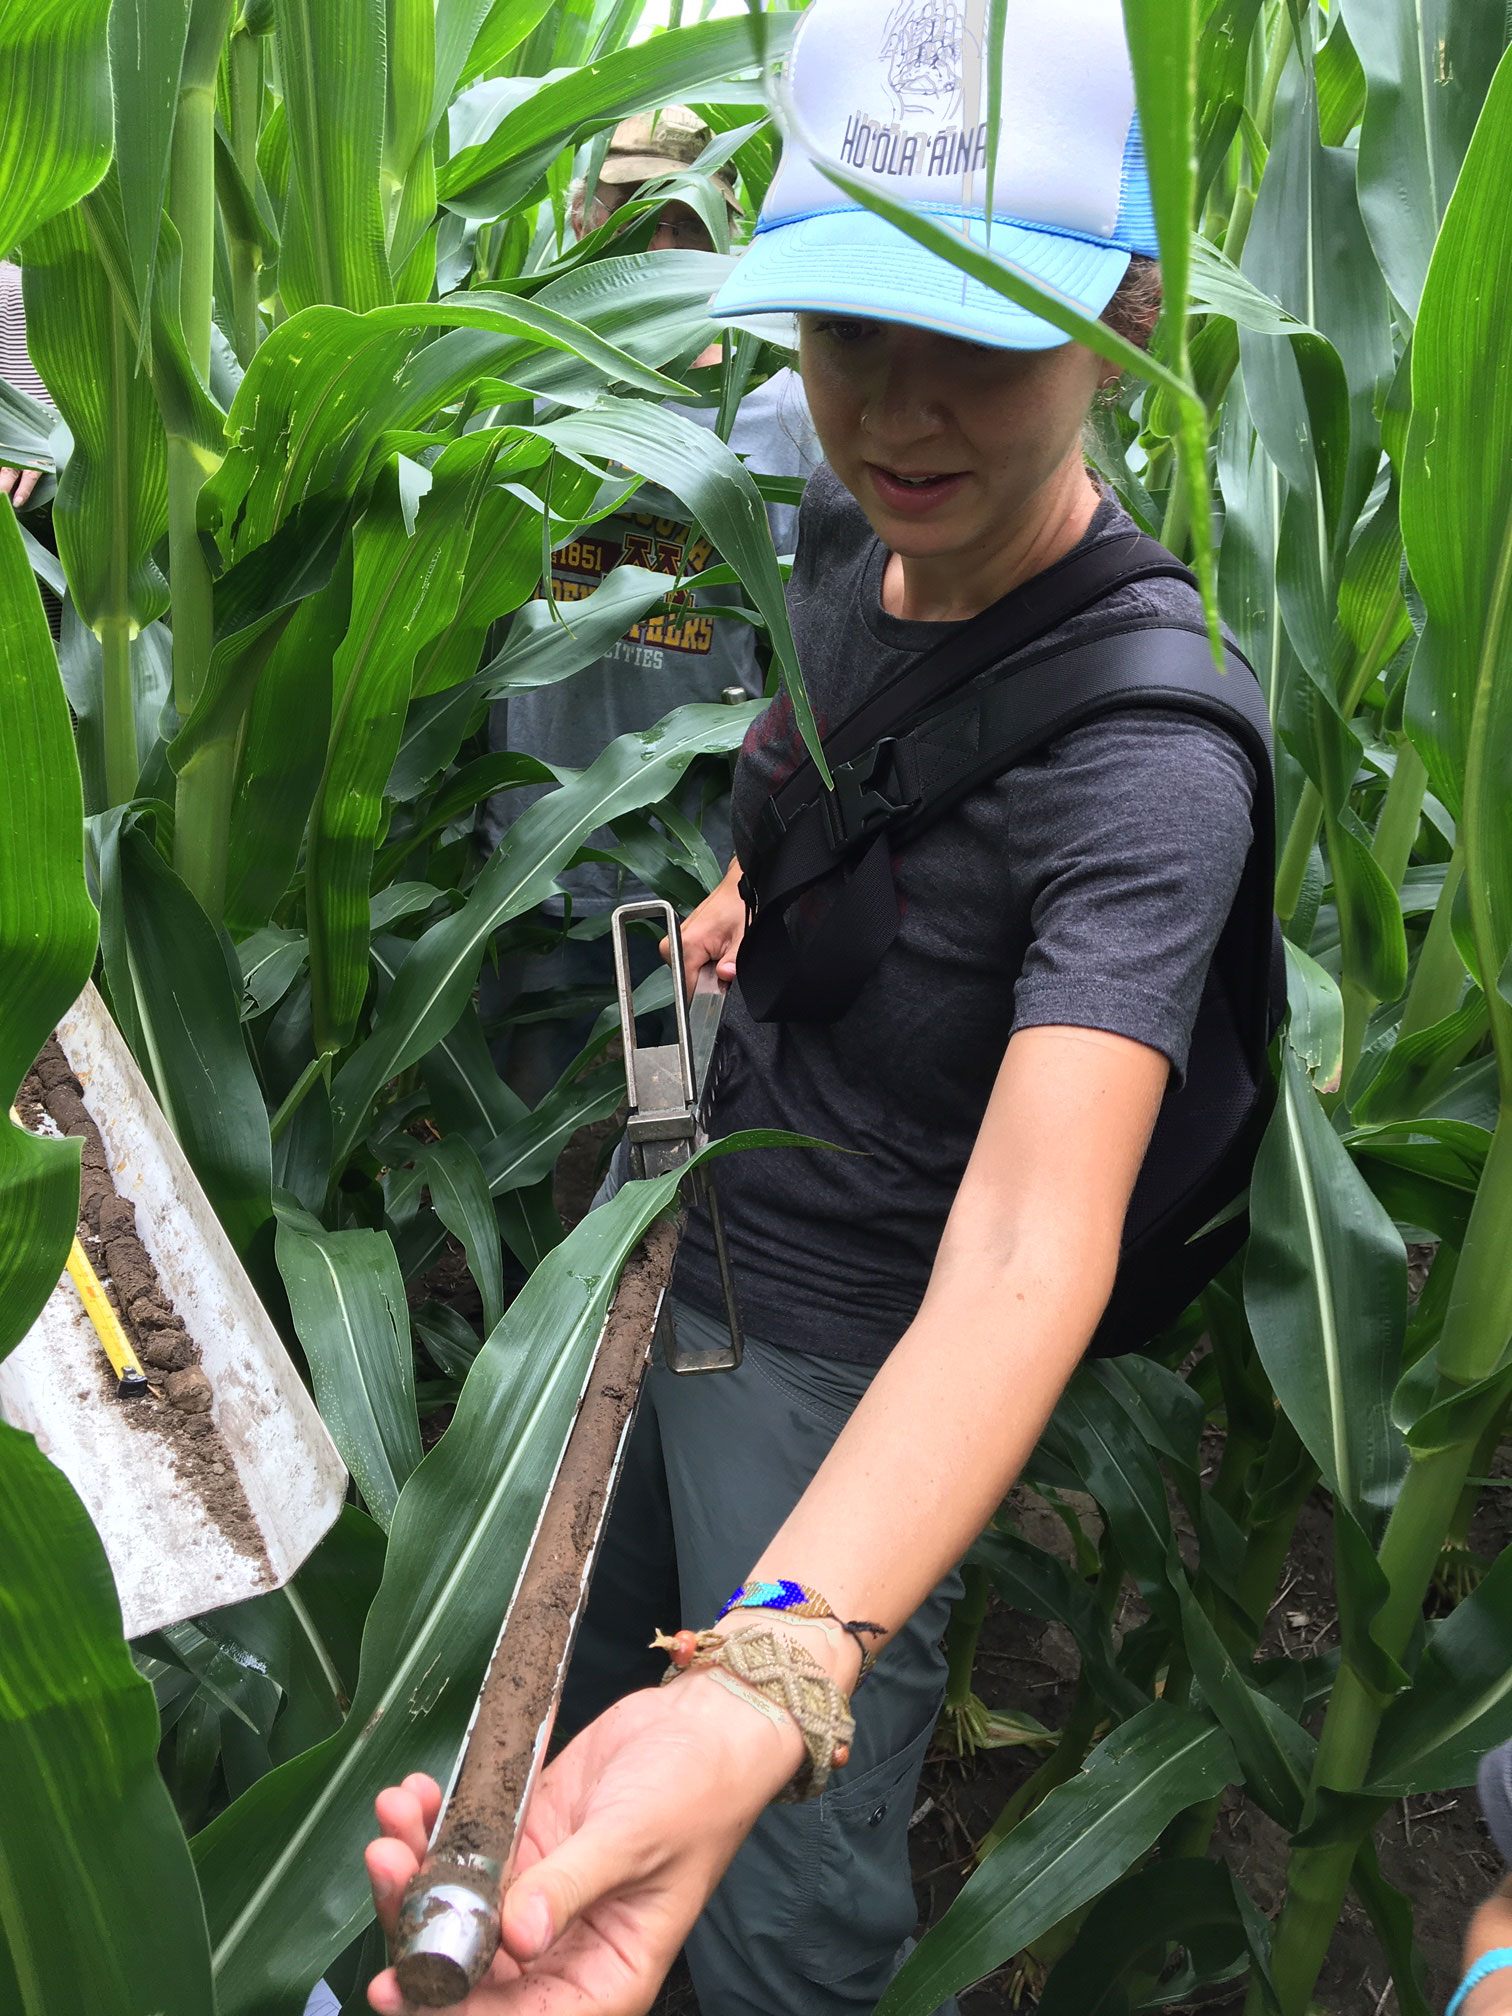 researcher holding a hose amongst rows of corn